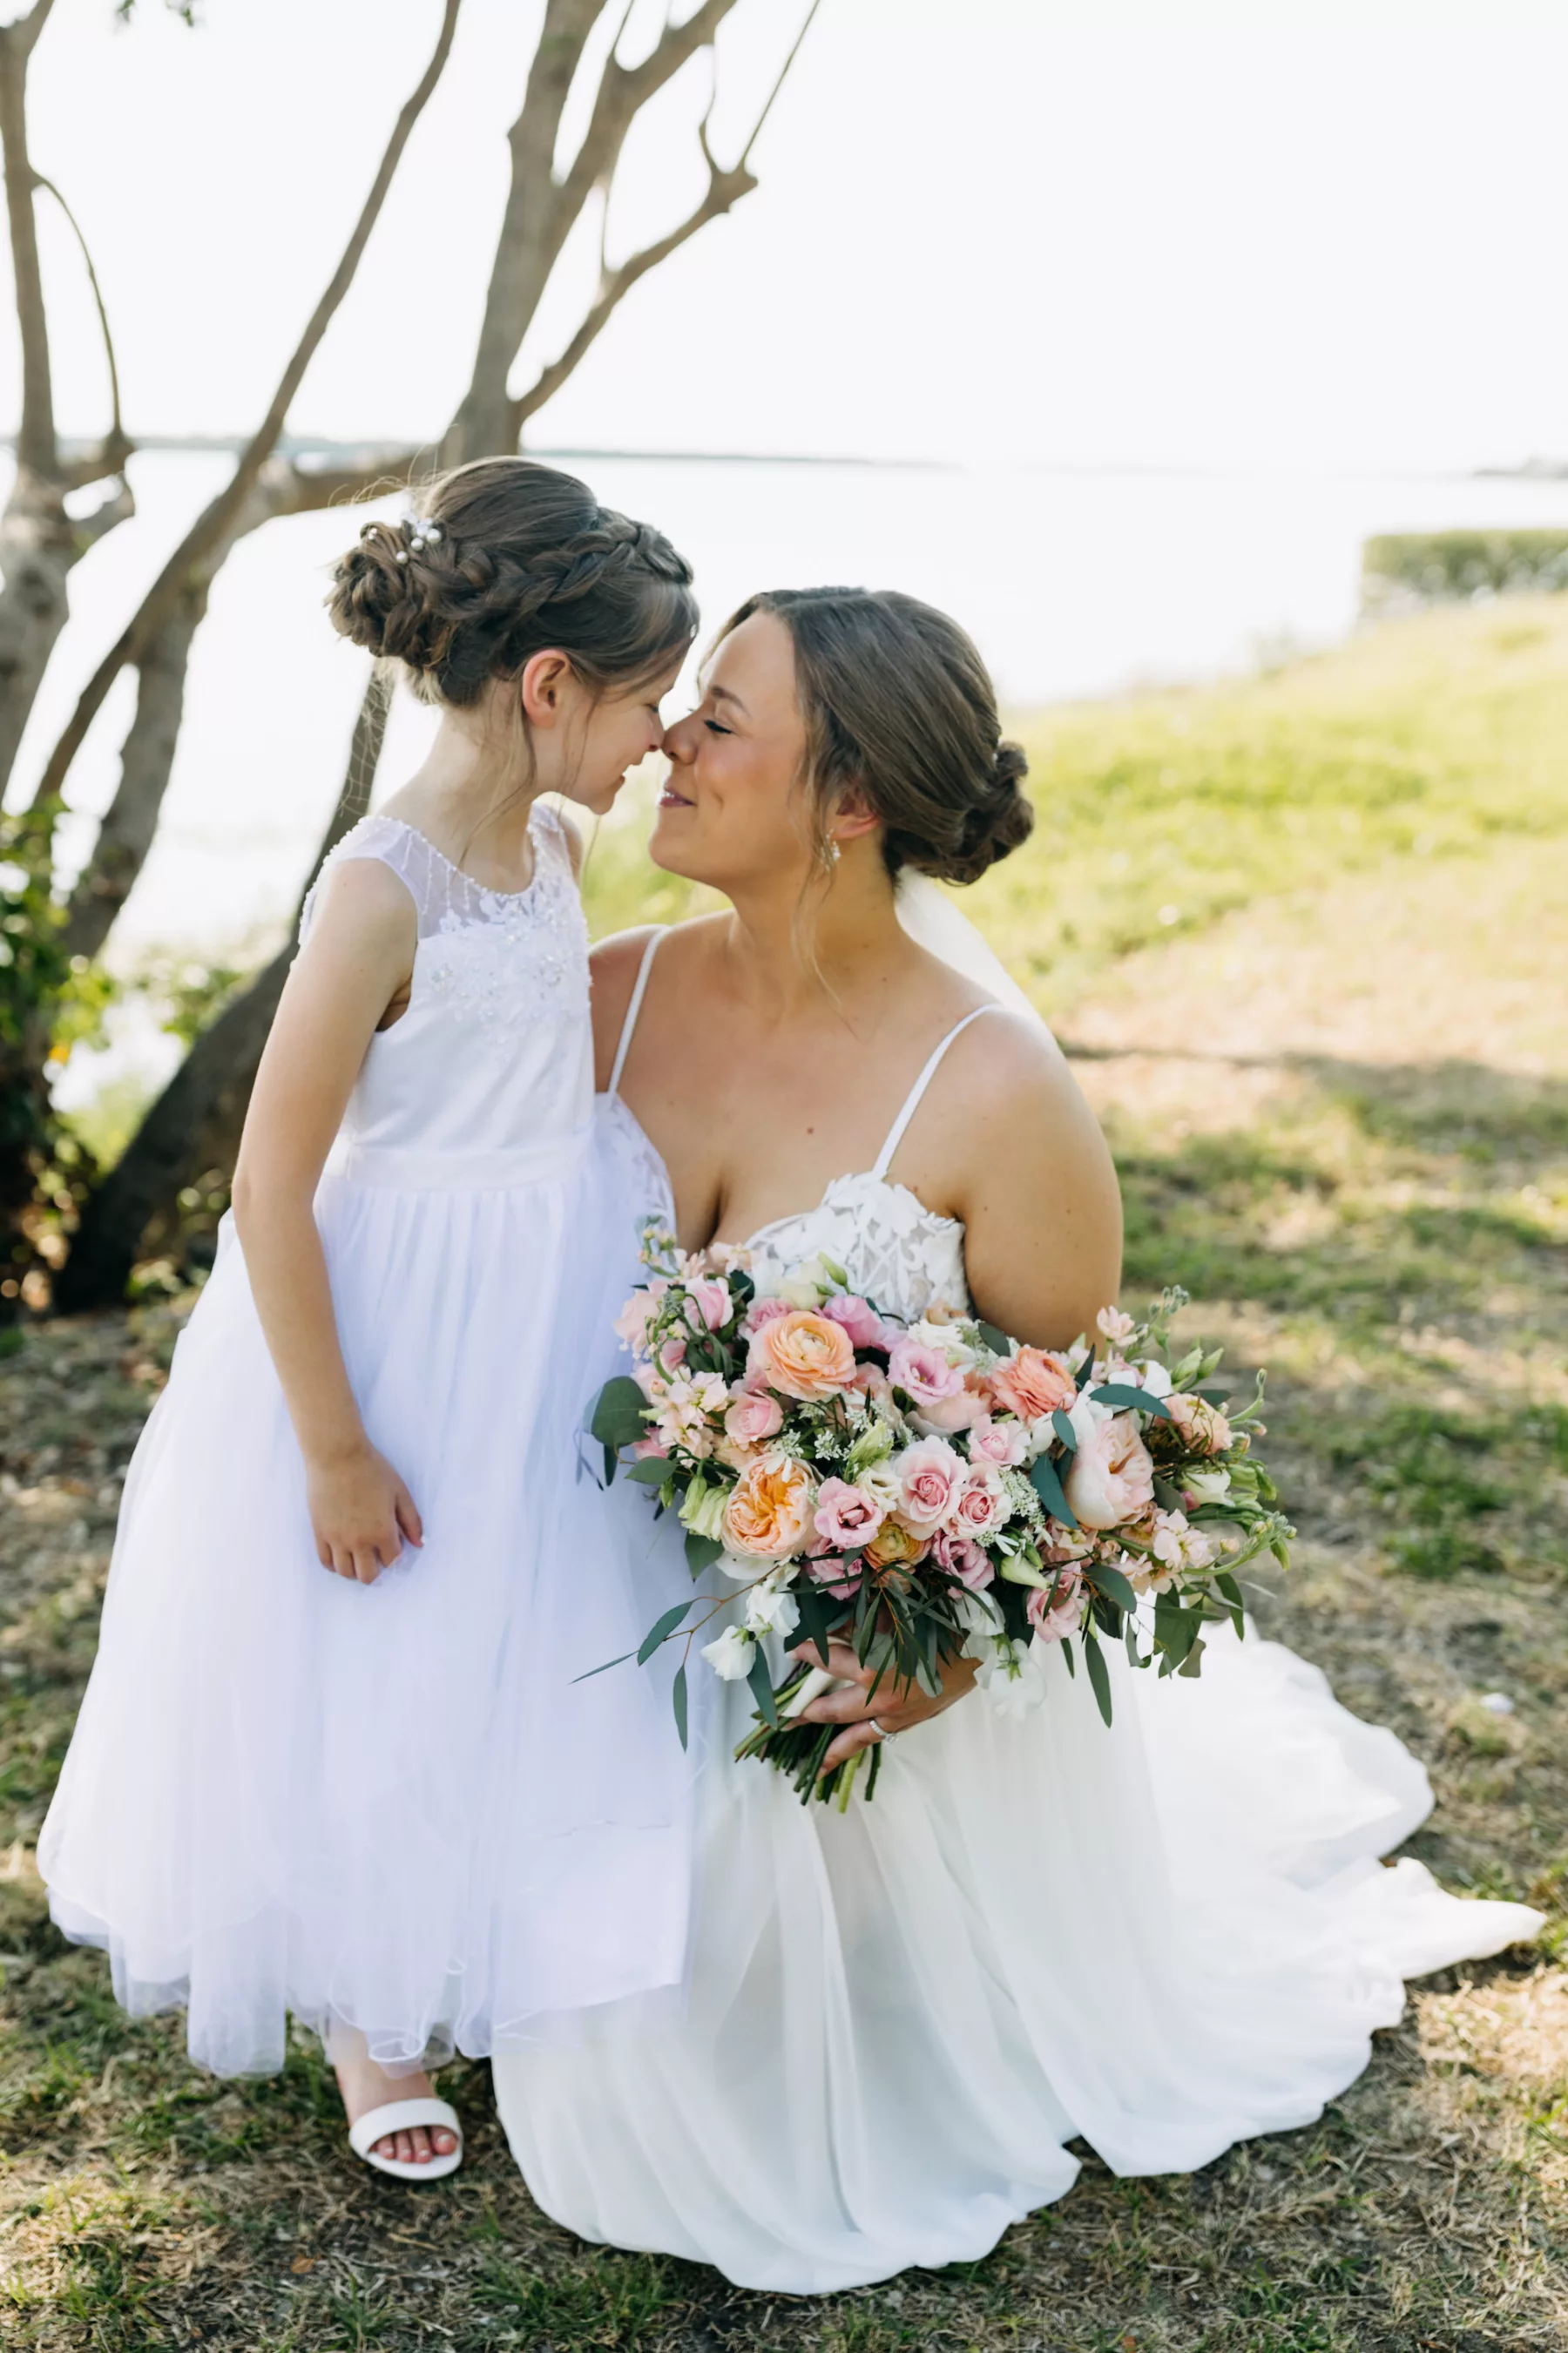 Bride with Daughter on Wedding Day Portrait | Pink and Orange Summer Rose Bouquet Ideas | Tampa Bay Hair and Makeup Adore Bridal | Florist Beneva Flowers